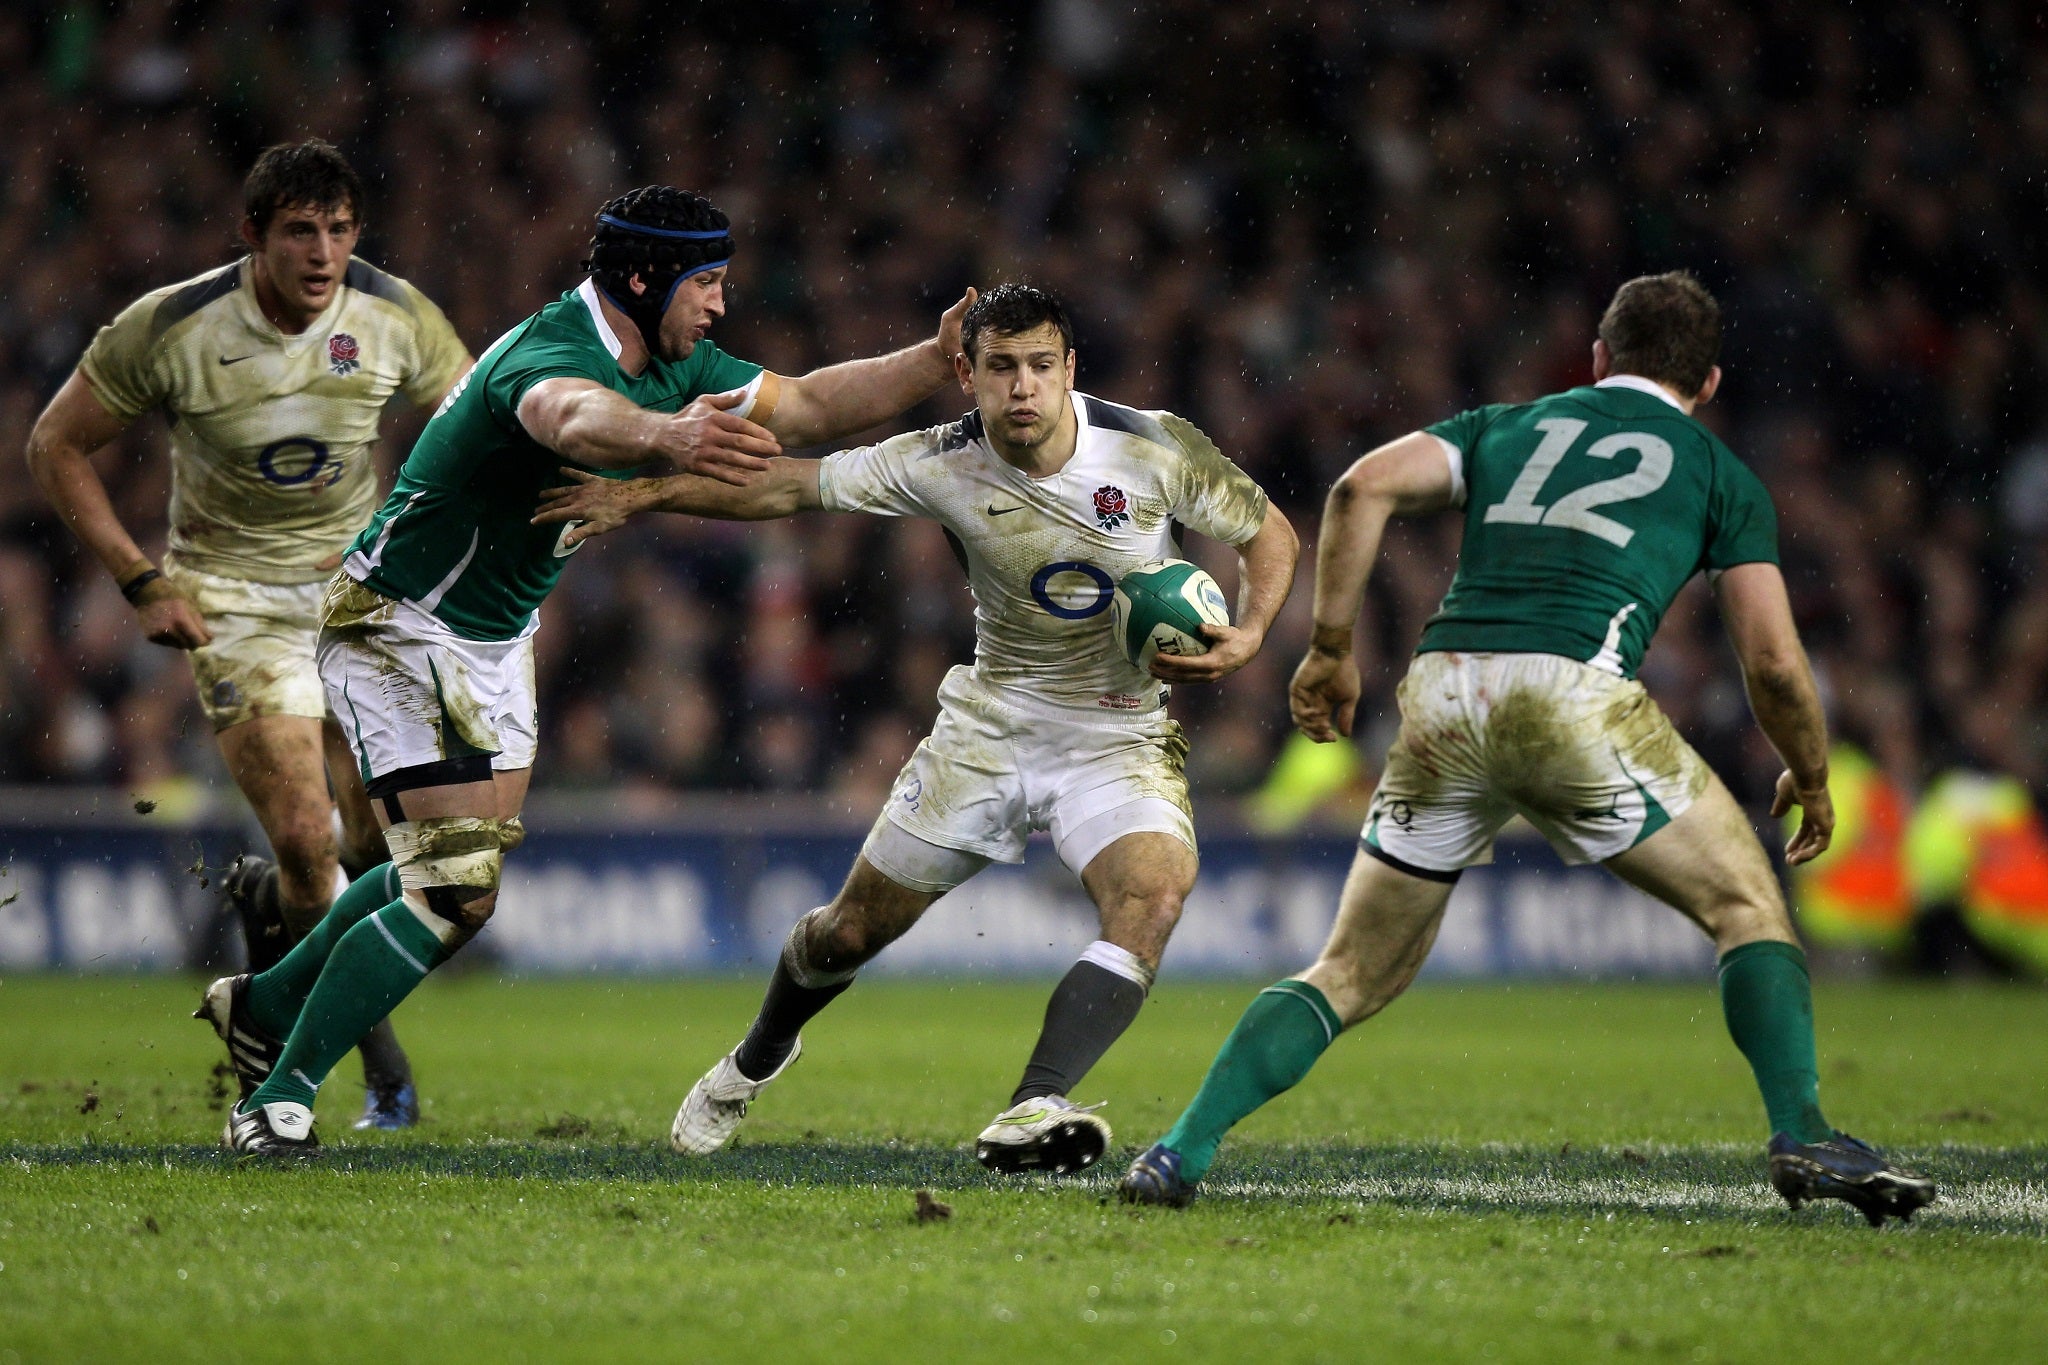 England are wary of the danger Ireland pose as they look to clinch the Grand Slam in similar circumstances to 2011